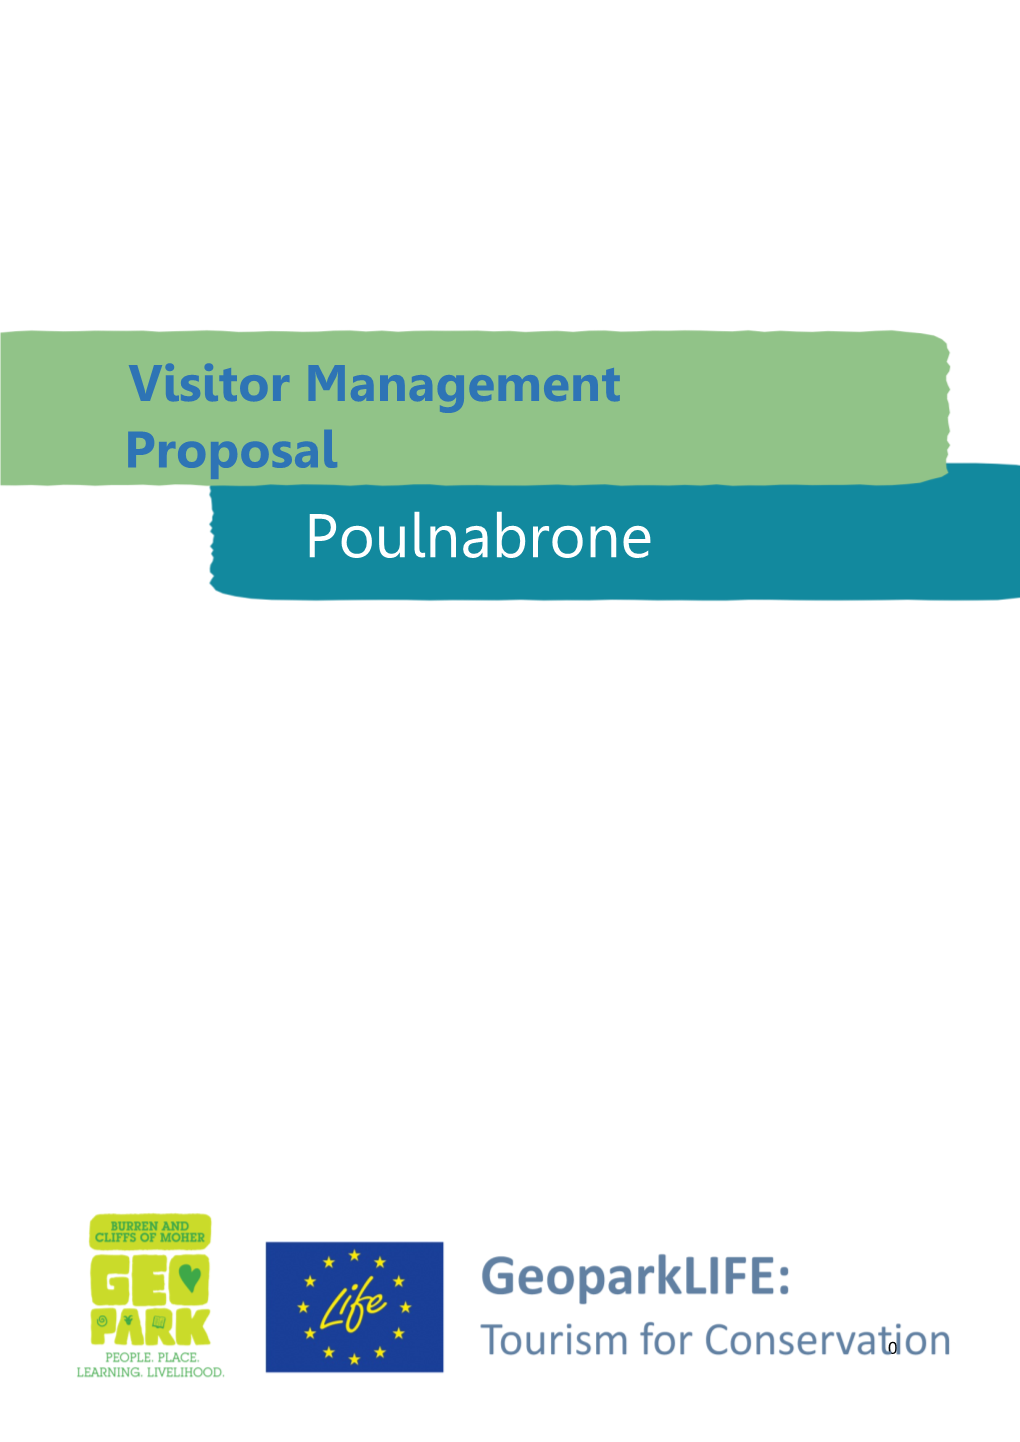 POULNABRONE VISITOR Management PROPOSAL